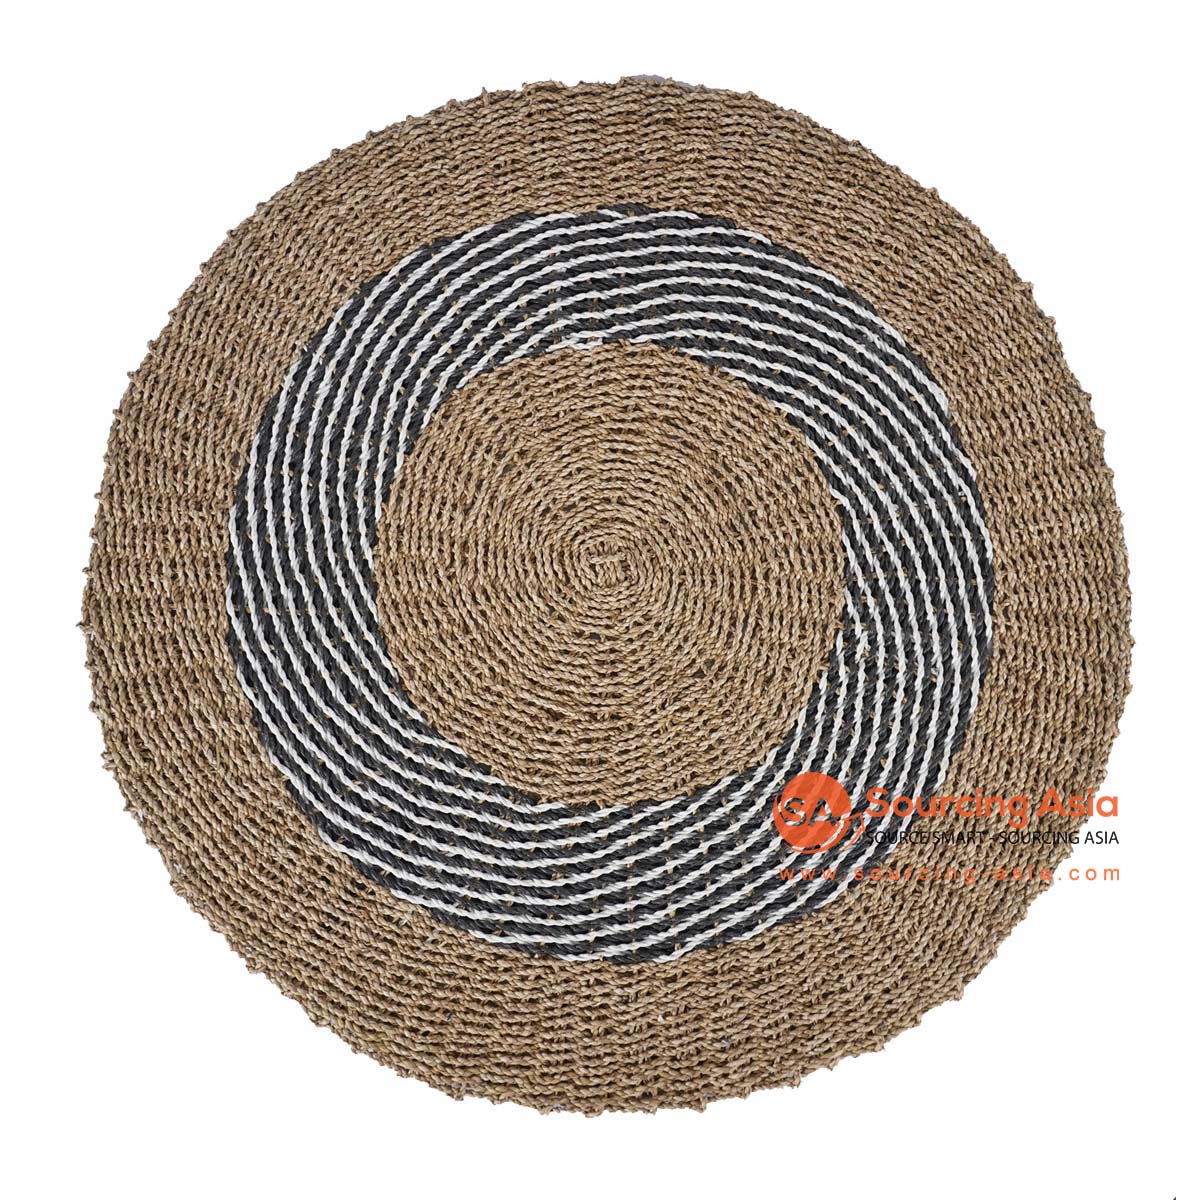 HBSC366 NATURAL AND PATTERNED SEAGRASS ROUND RUG